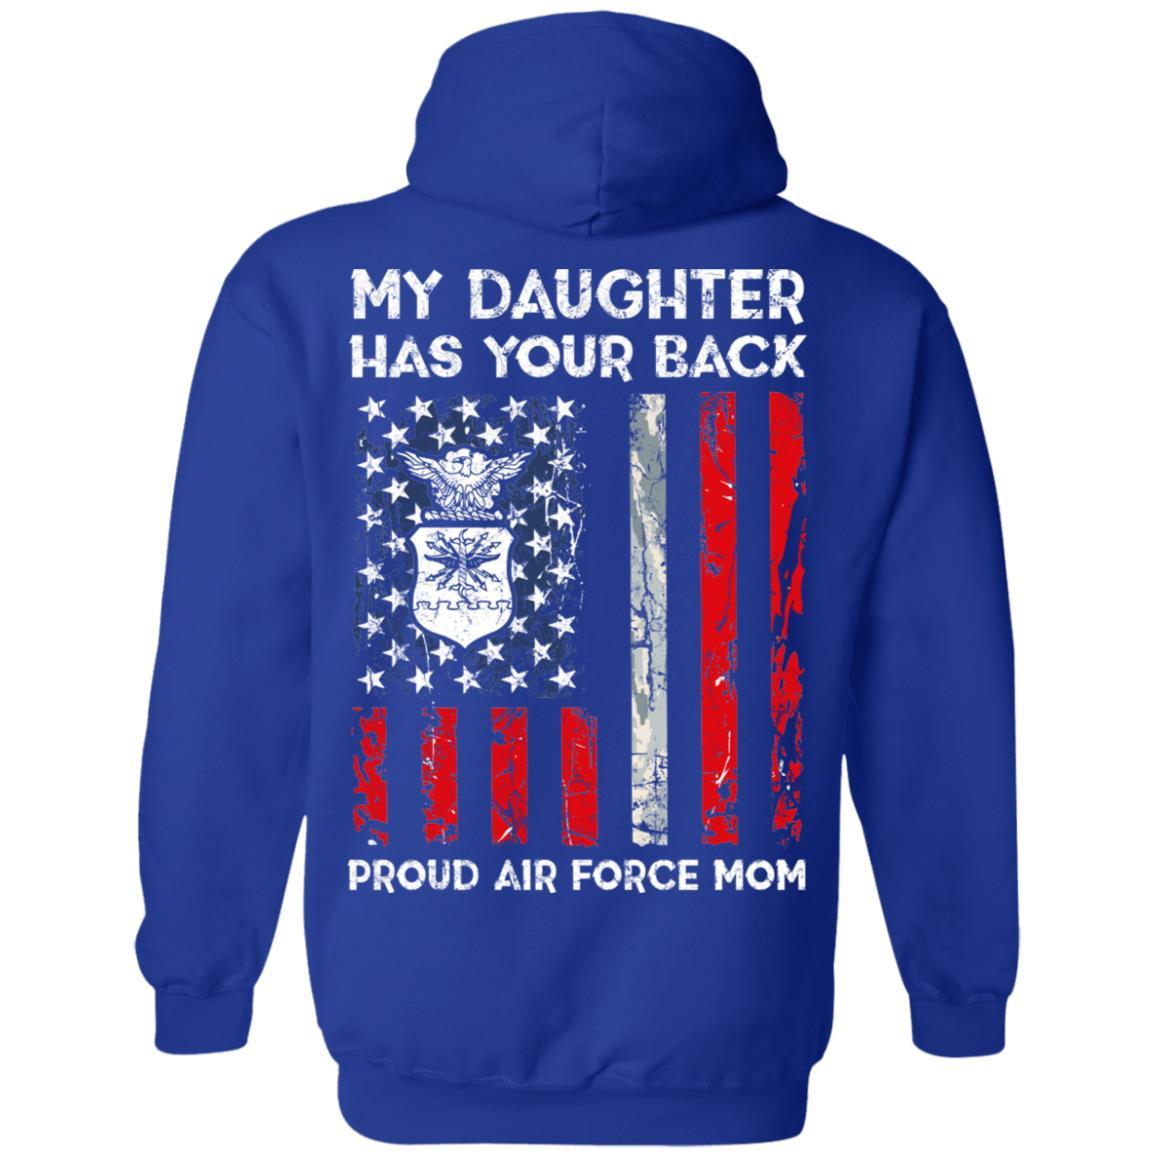 My Daughter Has Your Back - Proud Air Force Mom Men T Shirt On Back-TShirt-USAF-Veterans Nation